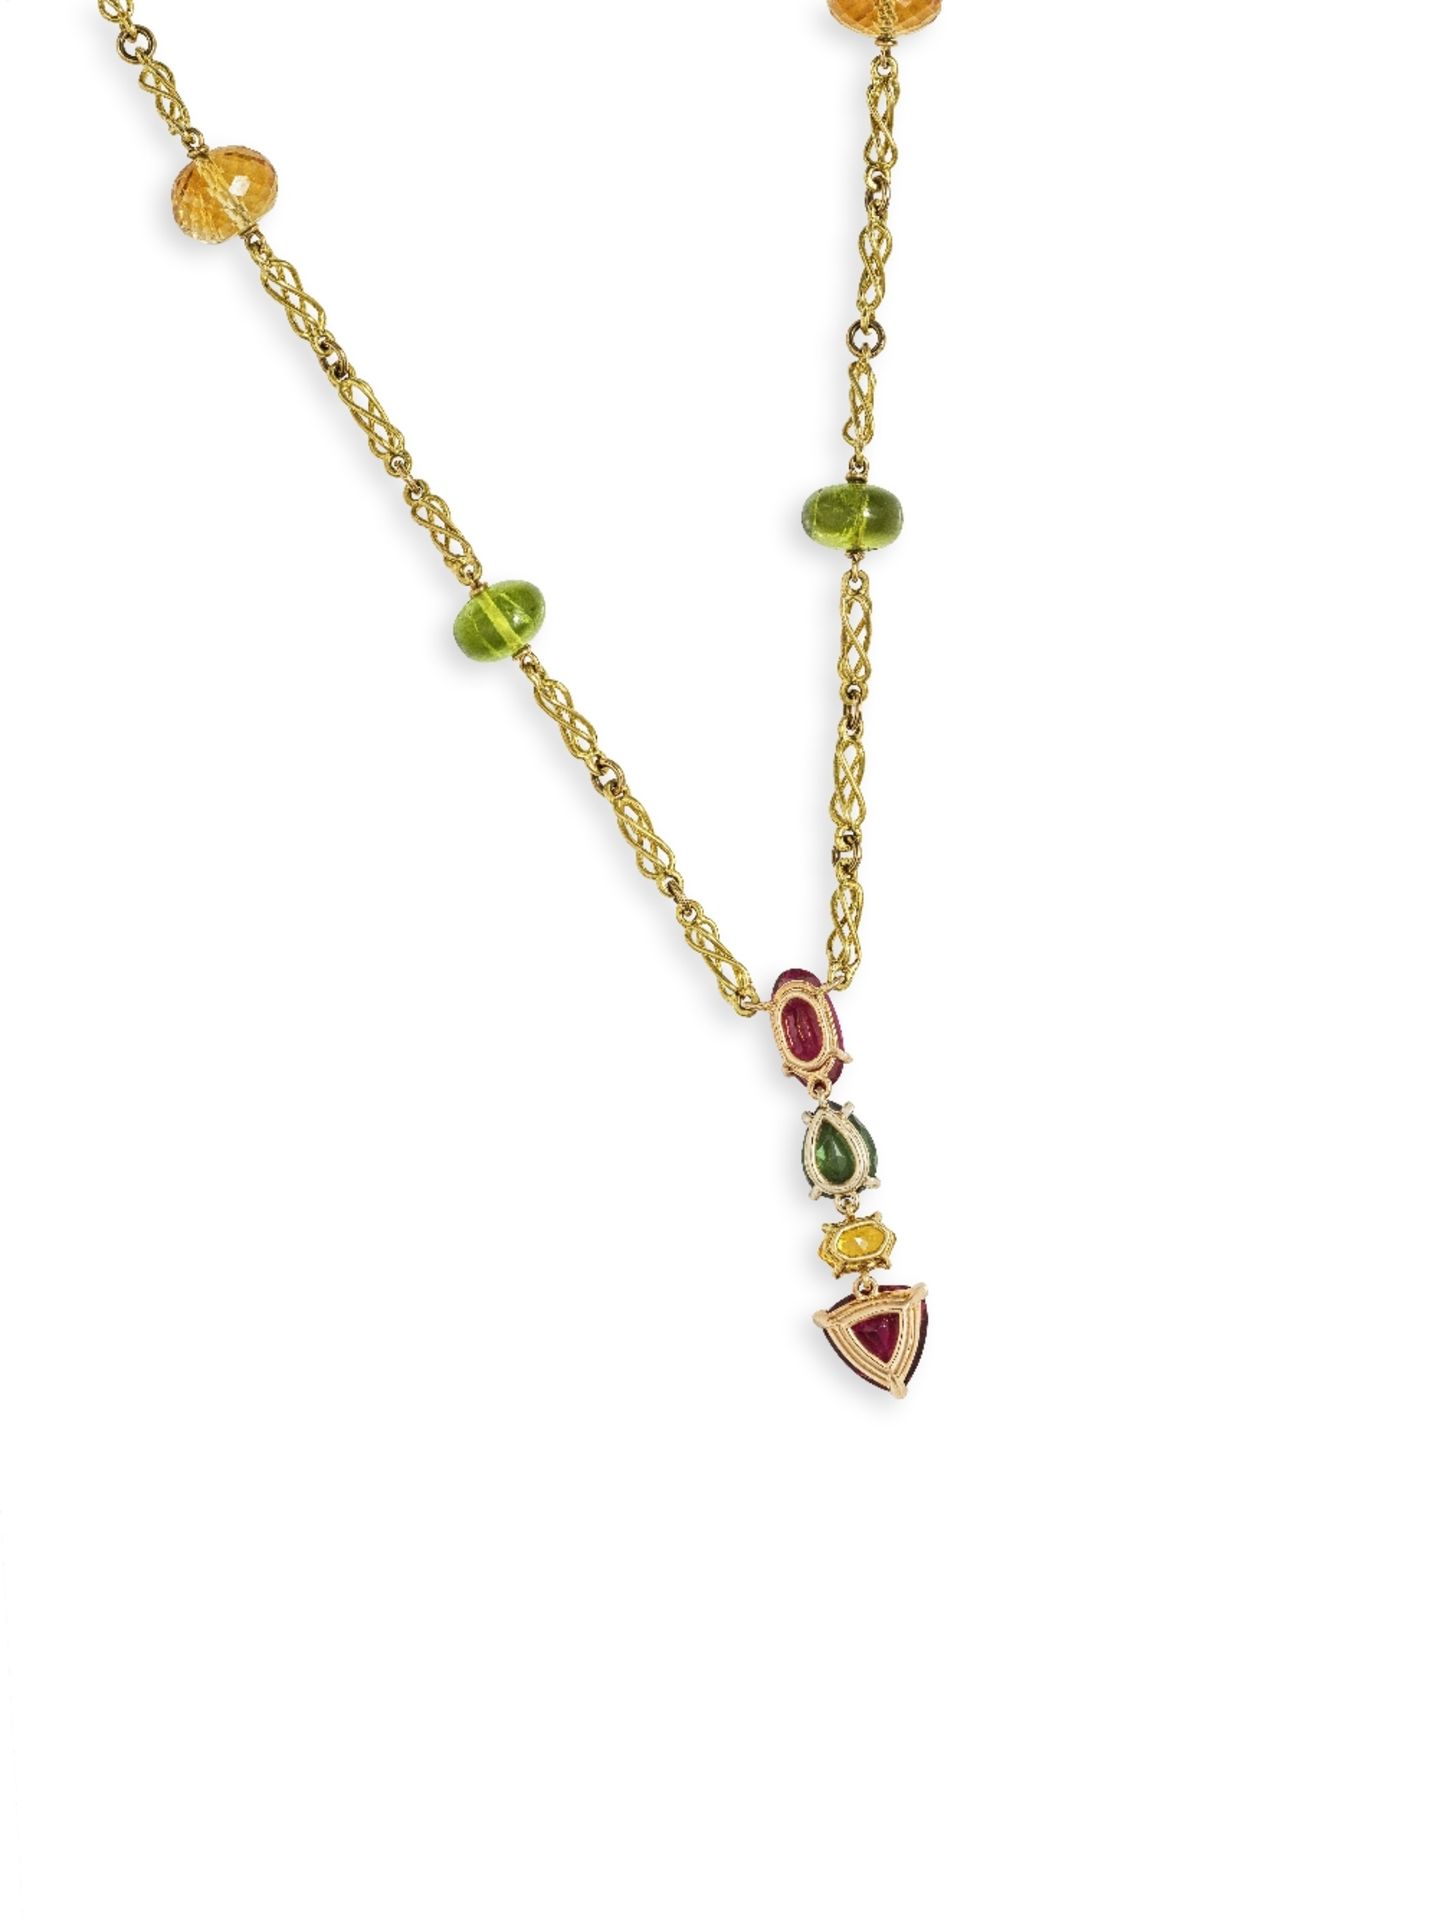 COLLIER CITRINES, TOURMALINES ET PERIDOTS - Image 2 of 2